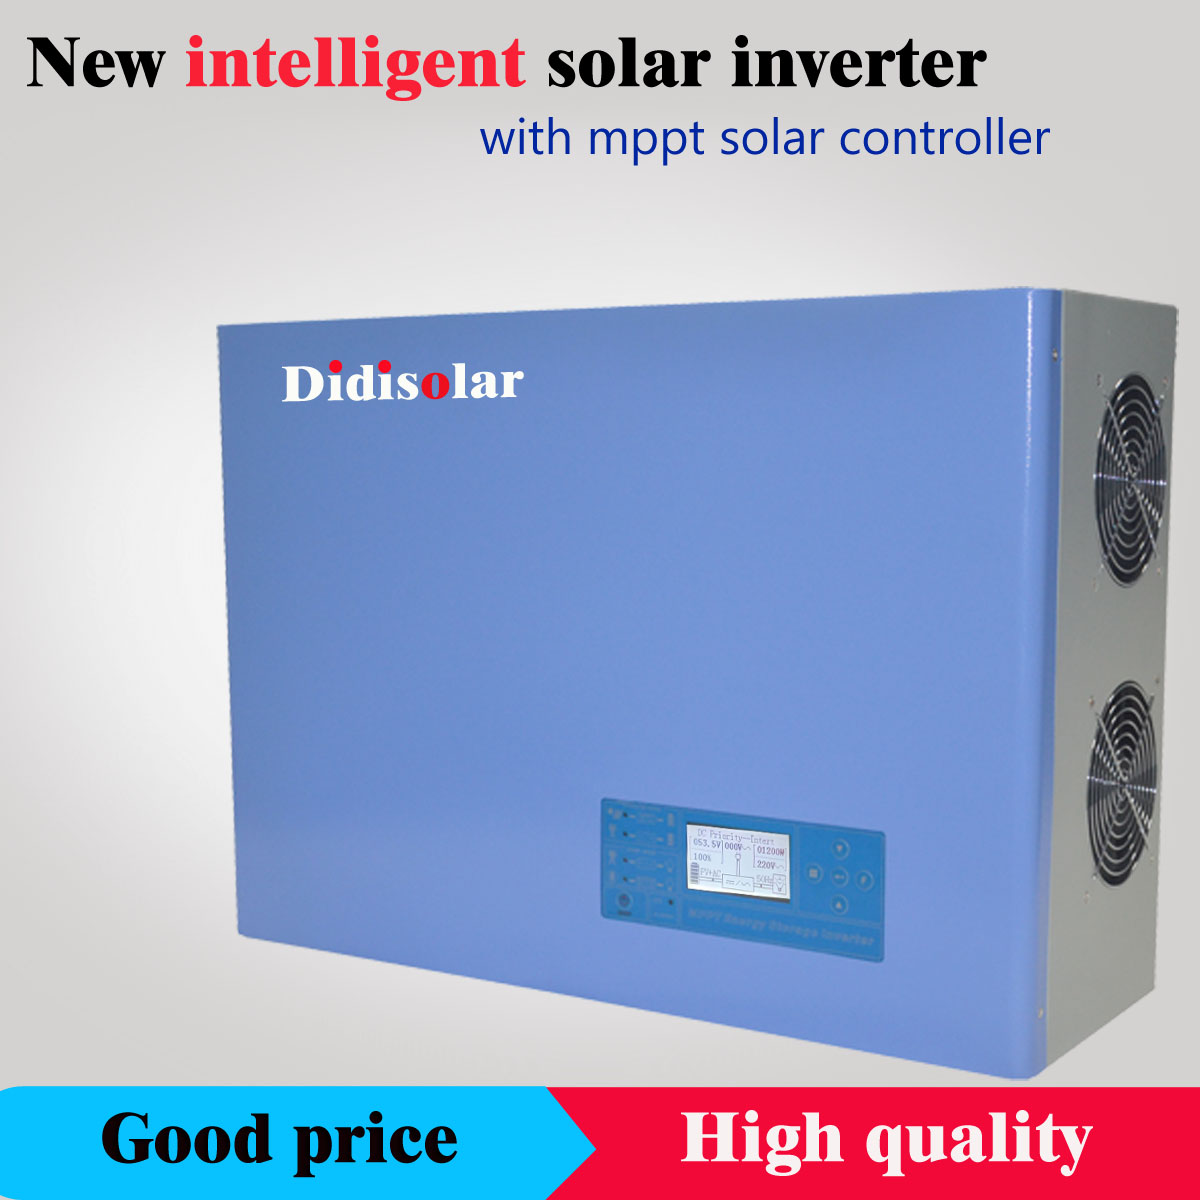 What is displayed on the charging status page of Didisolar smart solar storage inverter?